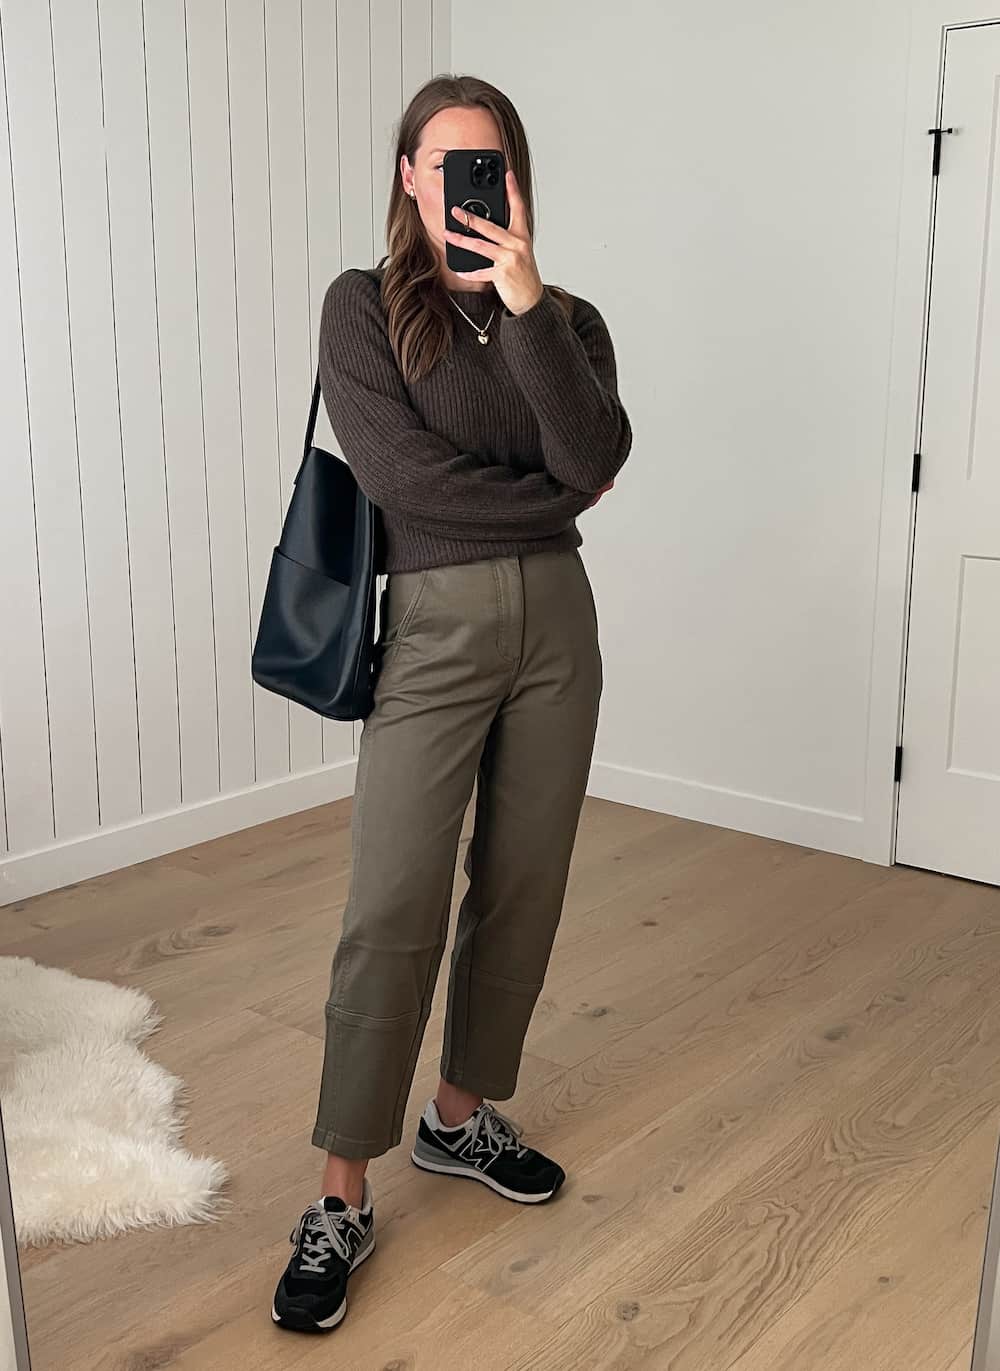 Christal wearing a dark brown knit sweater with olive green pants and black New Balance sneakers